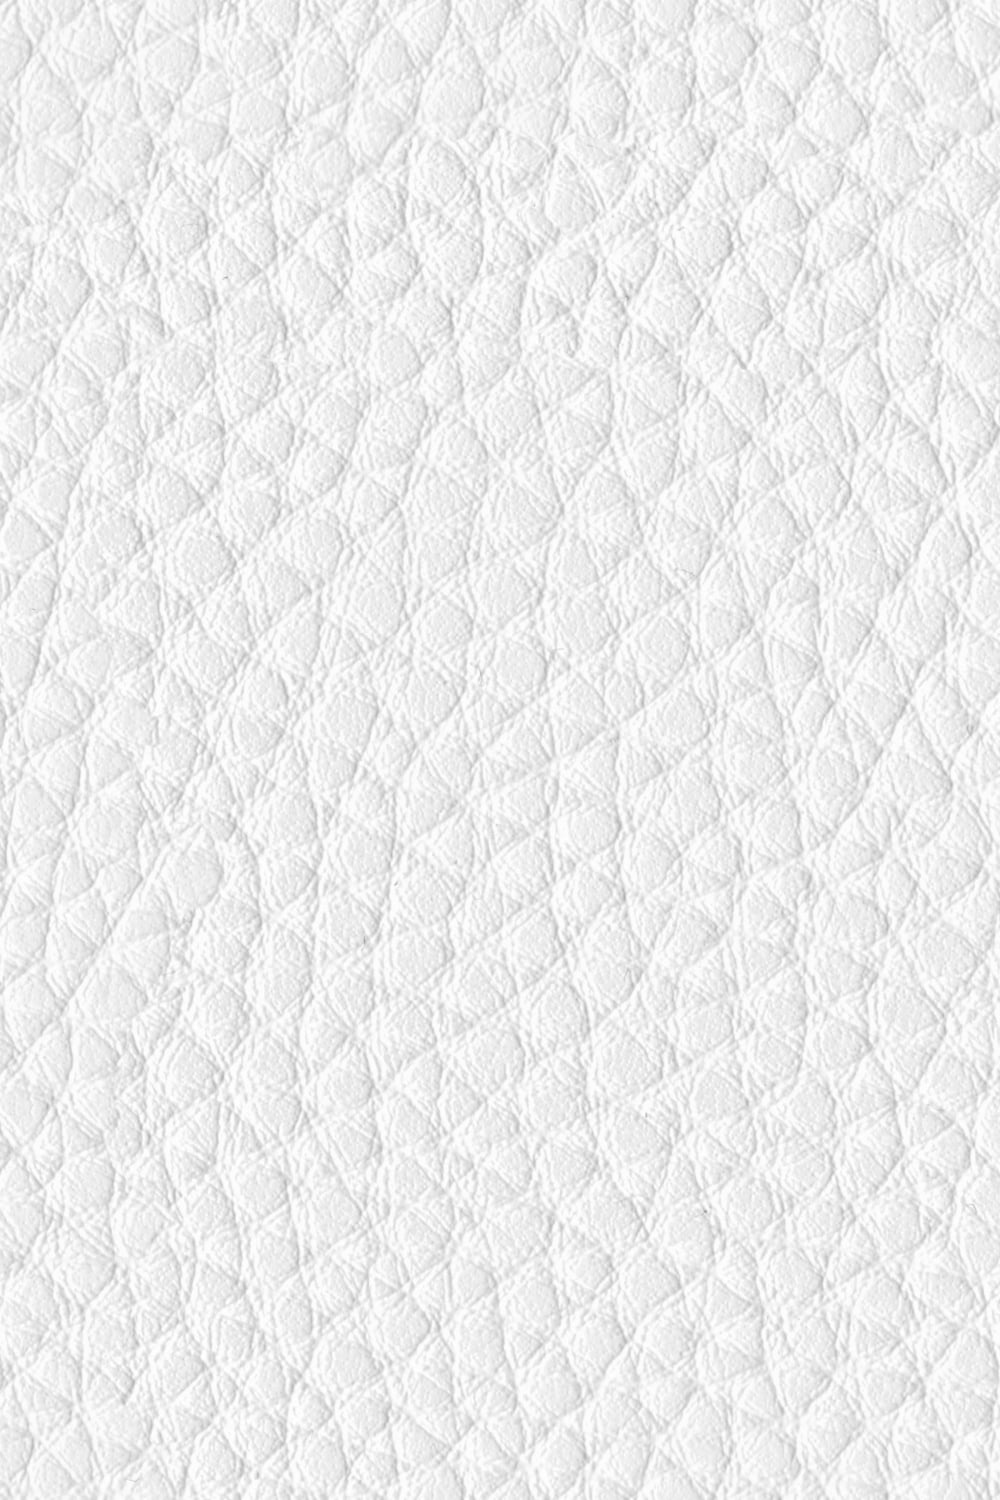 White artificial leather close-up